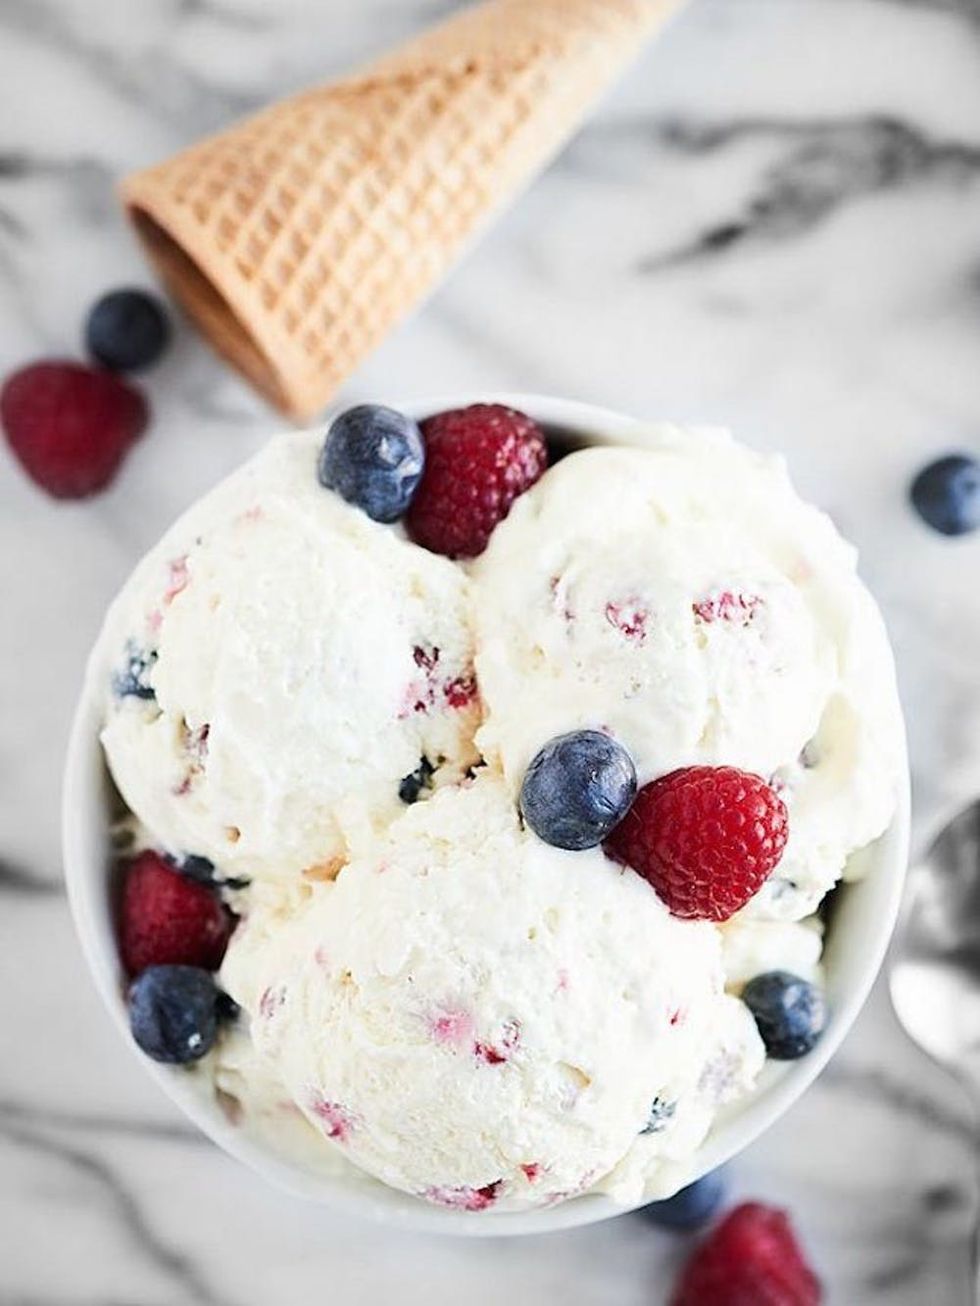 14 Boozy Ice Cream Recipes to Cool You Off This Summer - Brit + Co